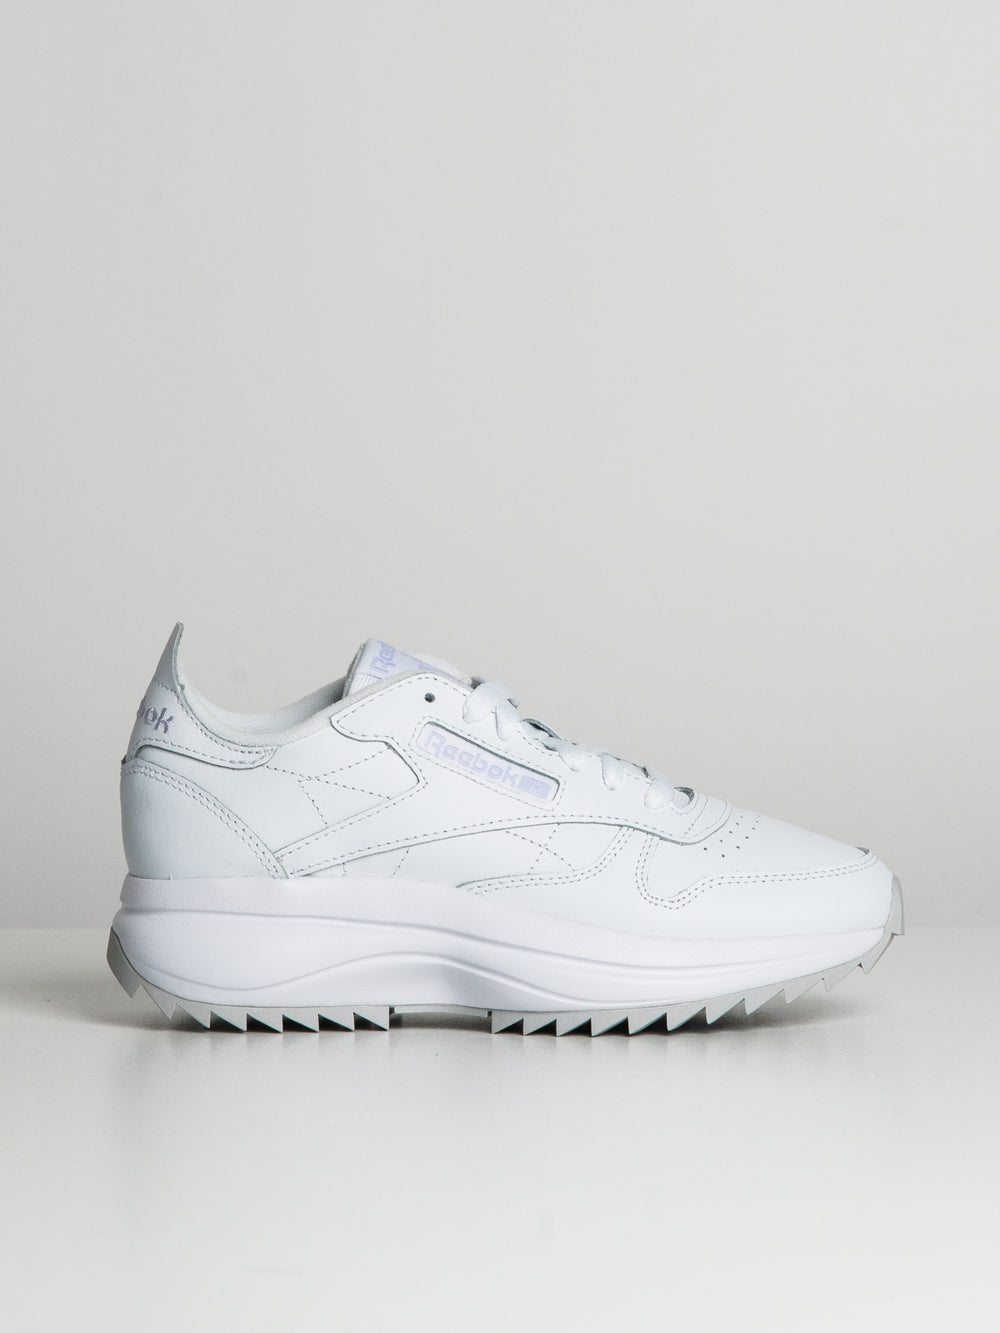 WOMENS REEBOK CLASSIC LEATHER SP EXTRA